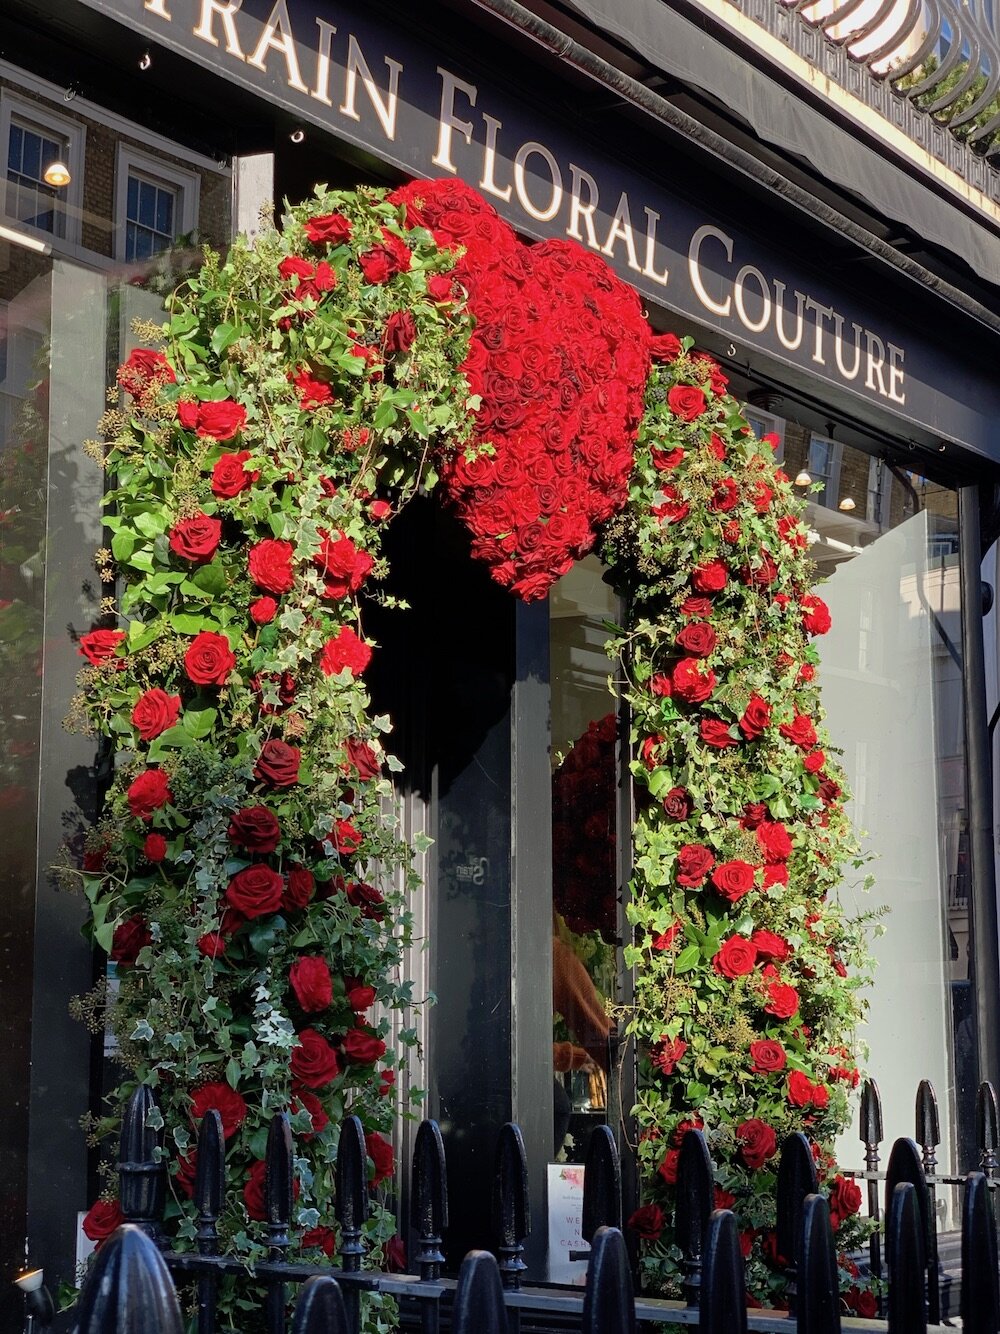 Neill Strain Floral Couture Introduces the New Collection of Valentine’s Day Flowers - entrance arch of red roses on thursd